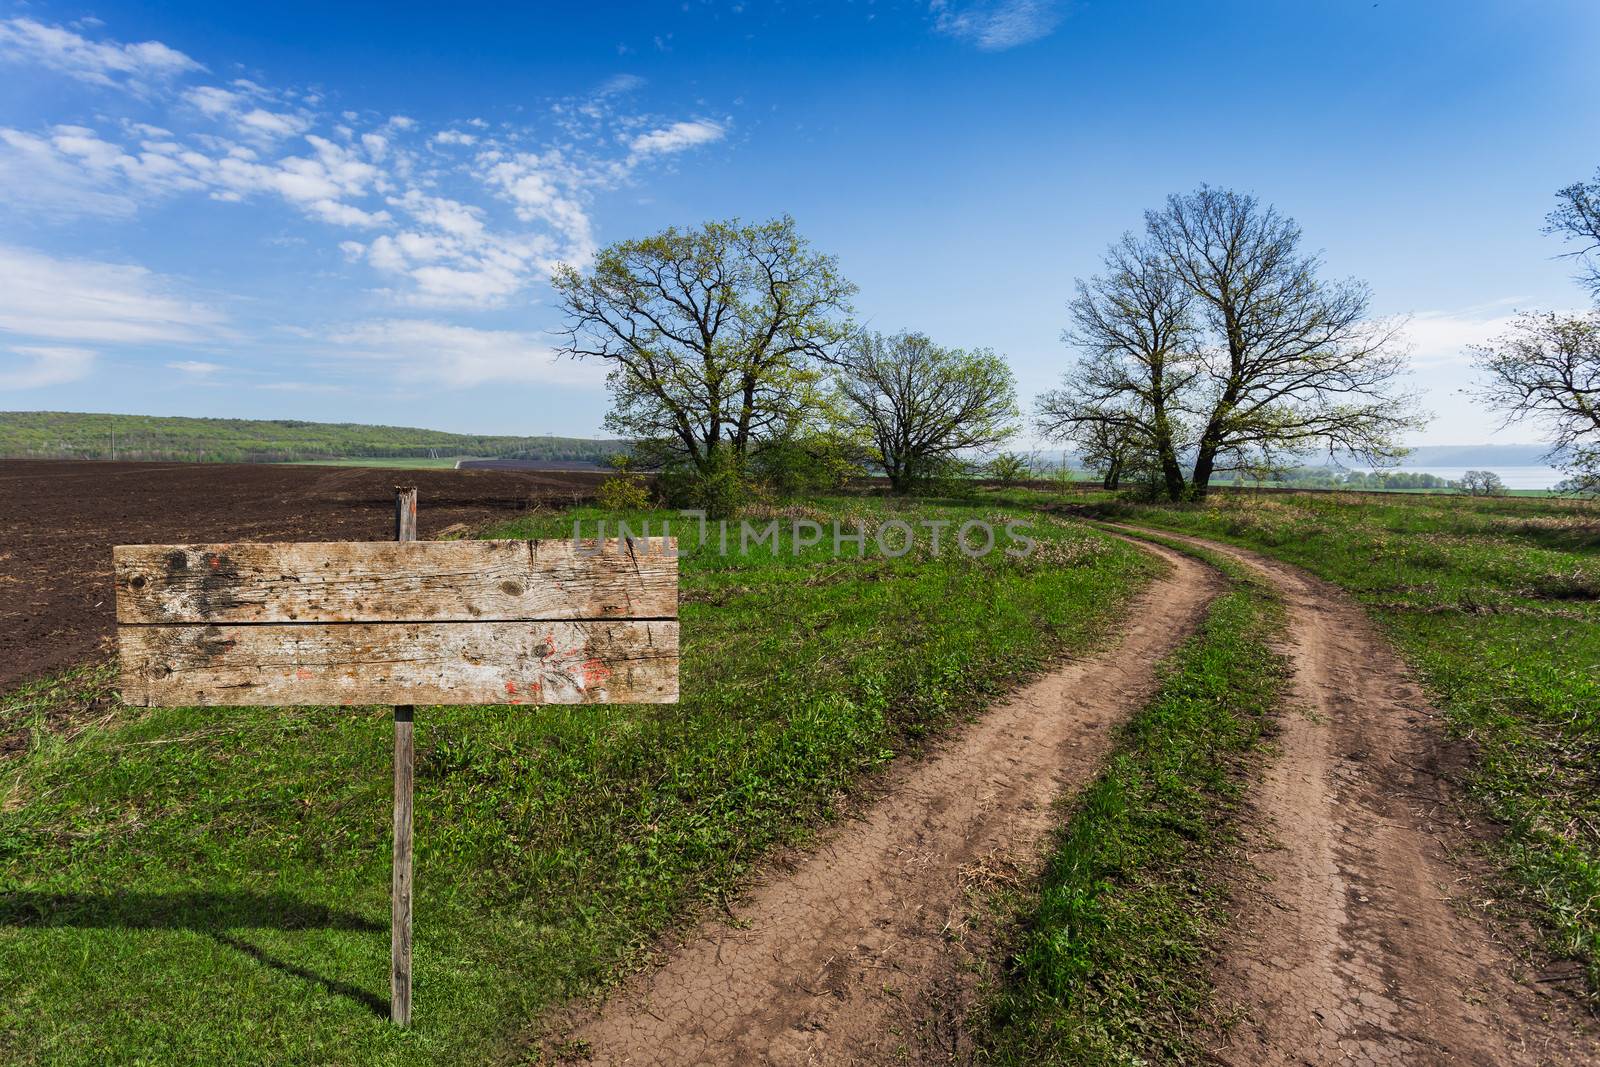 old wooden sign on a country road in rural areas